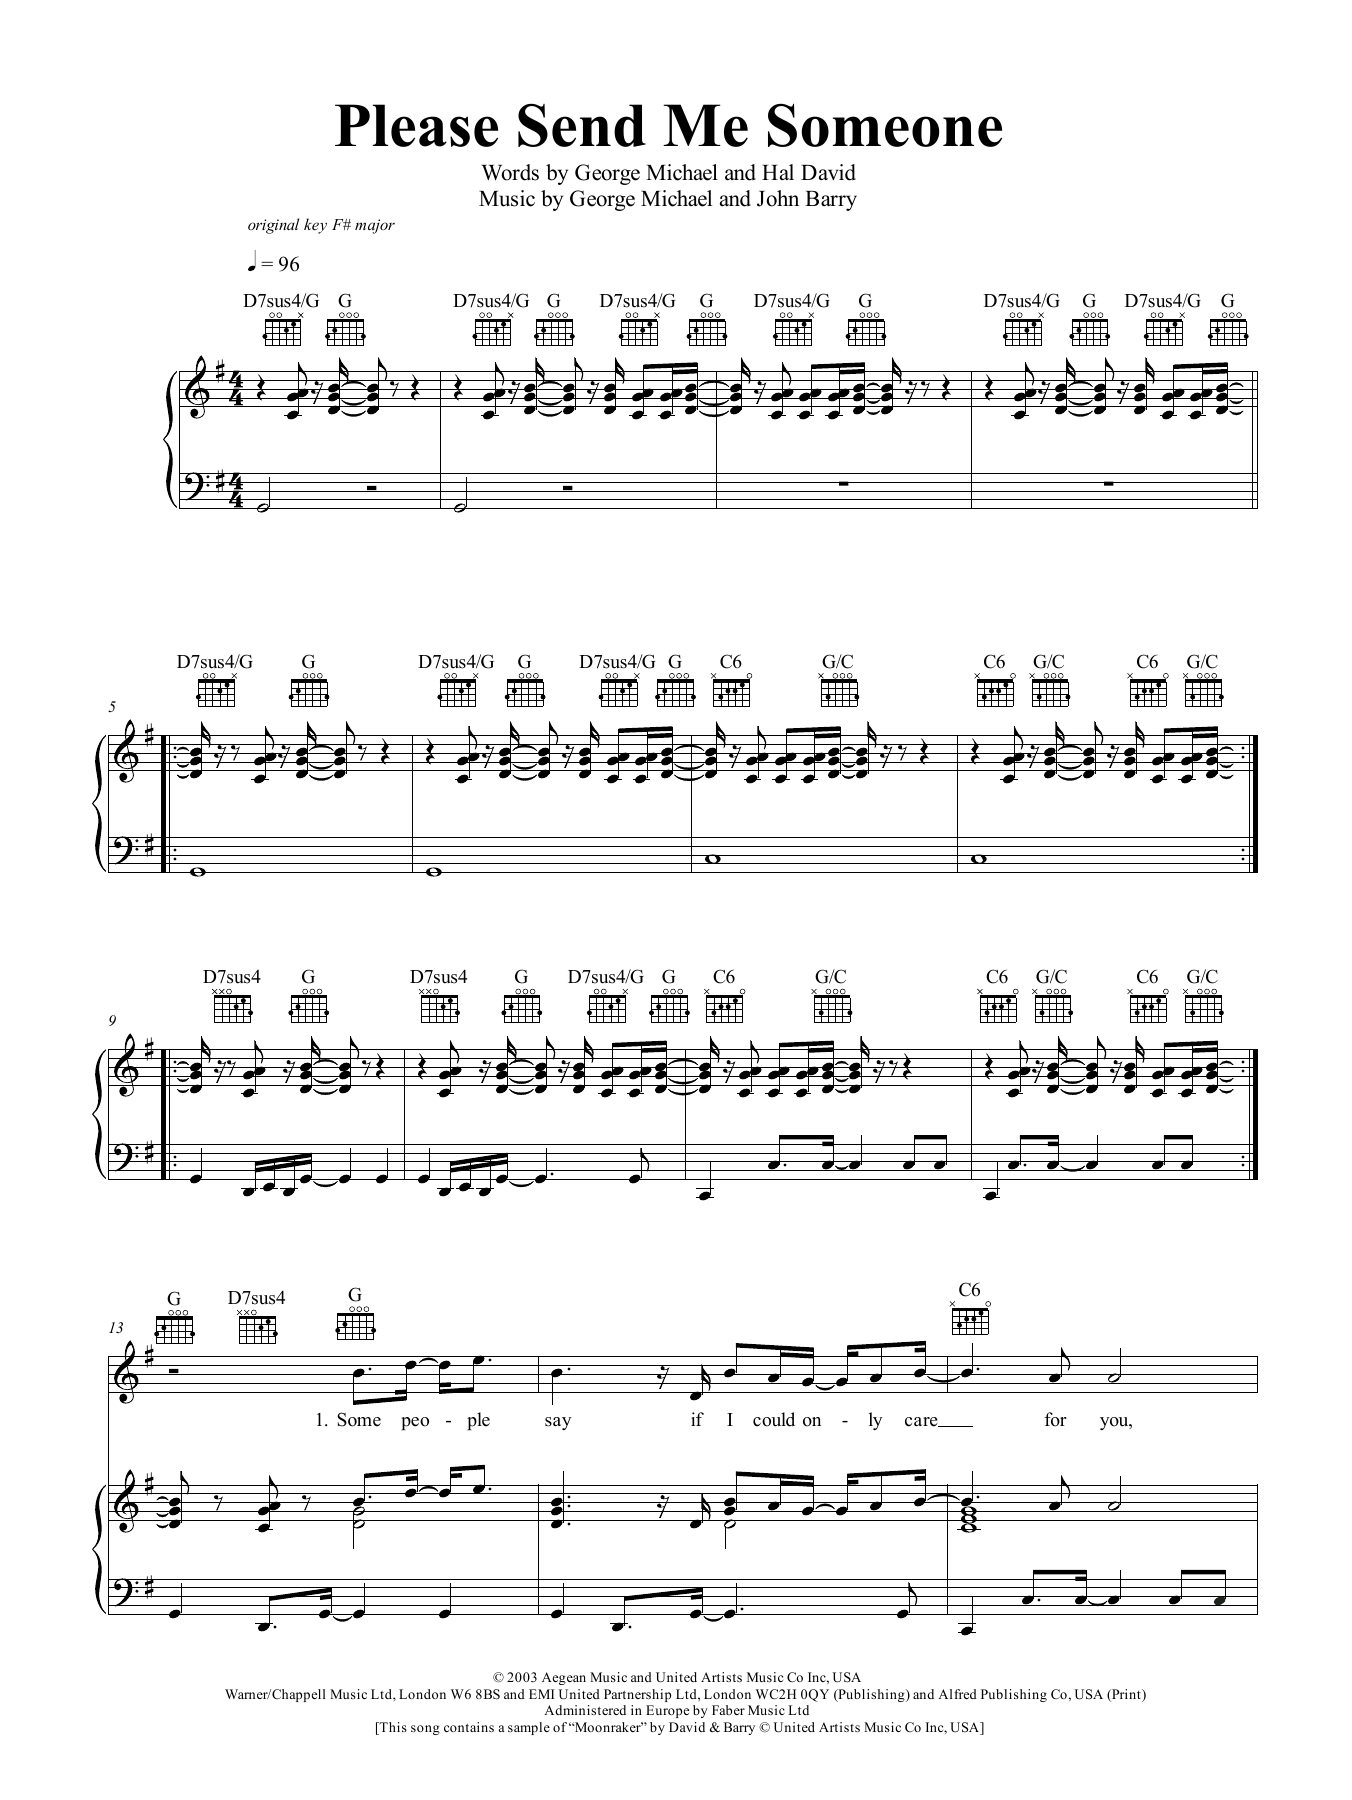 Download George Michael Please Send Me Someone Sheet Music